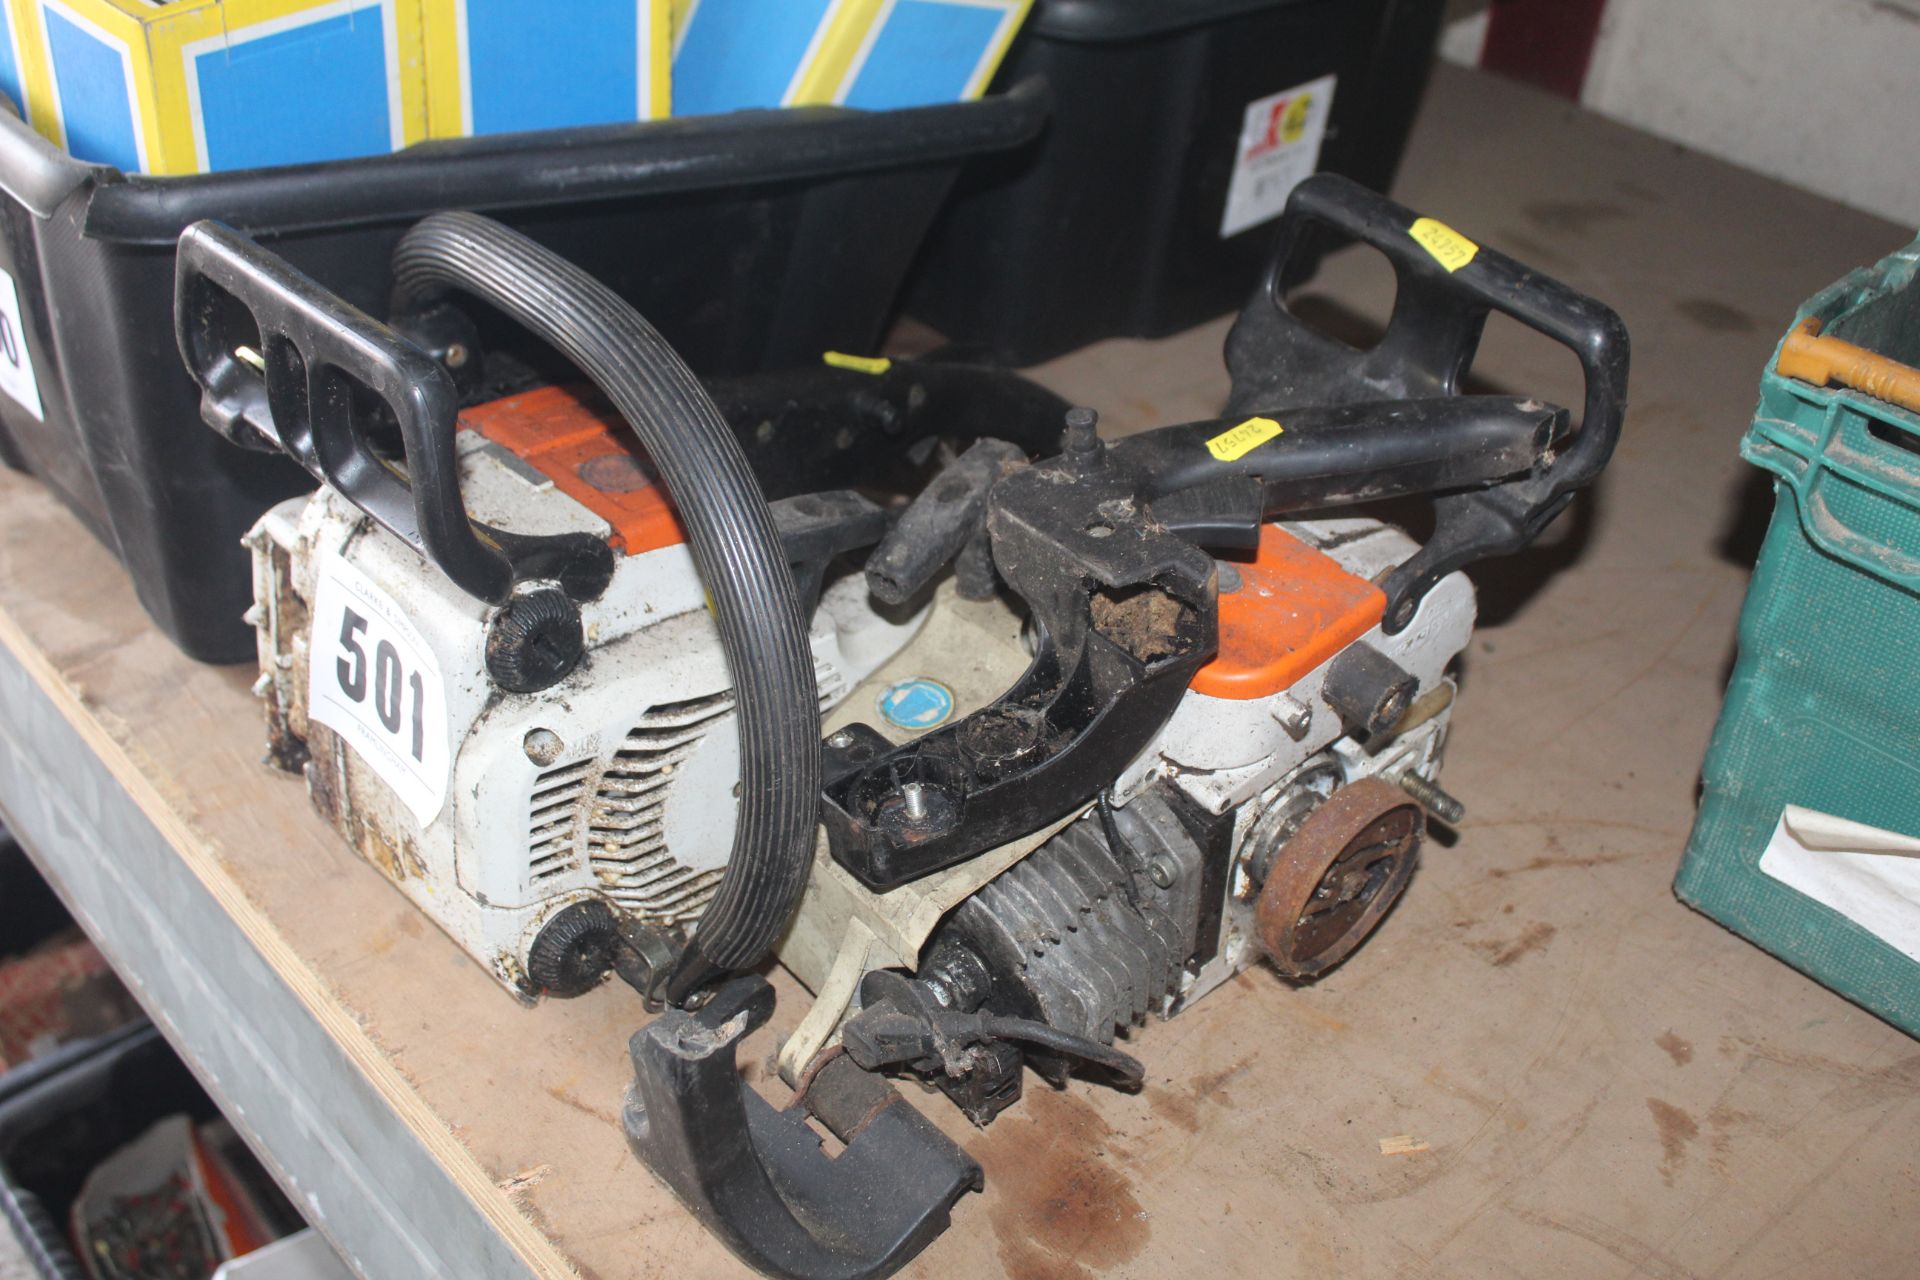 2x chainsaws for spares.